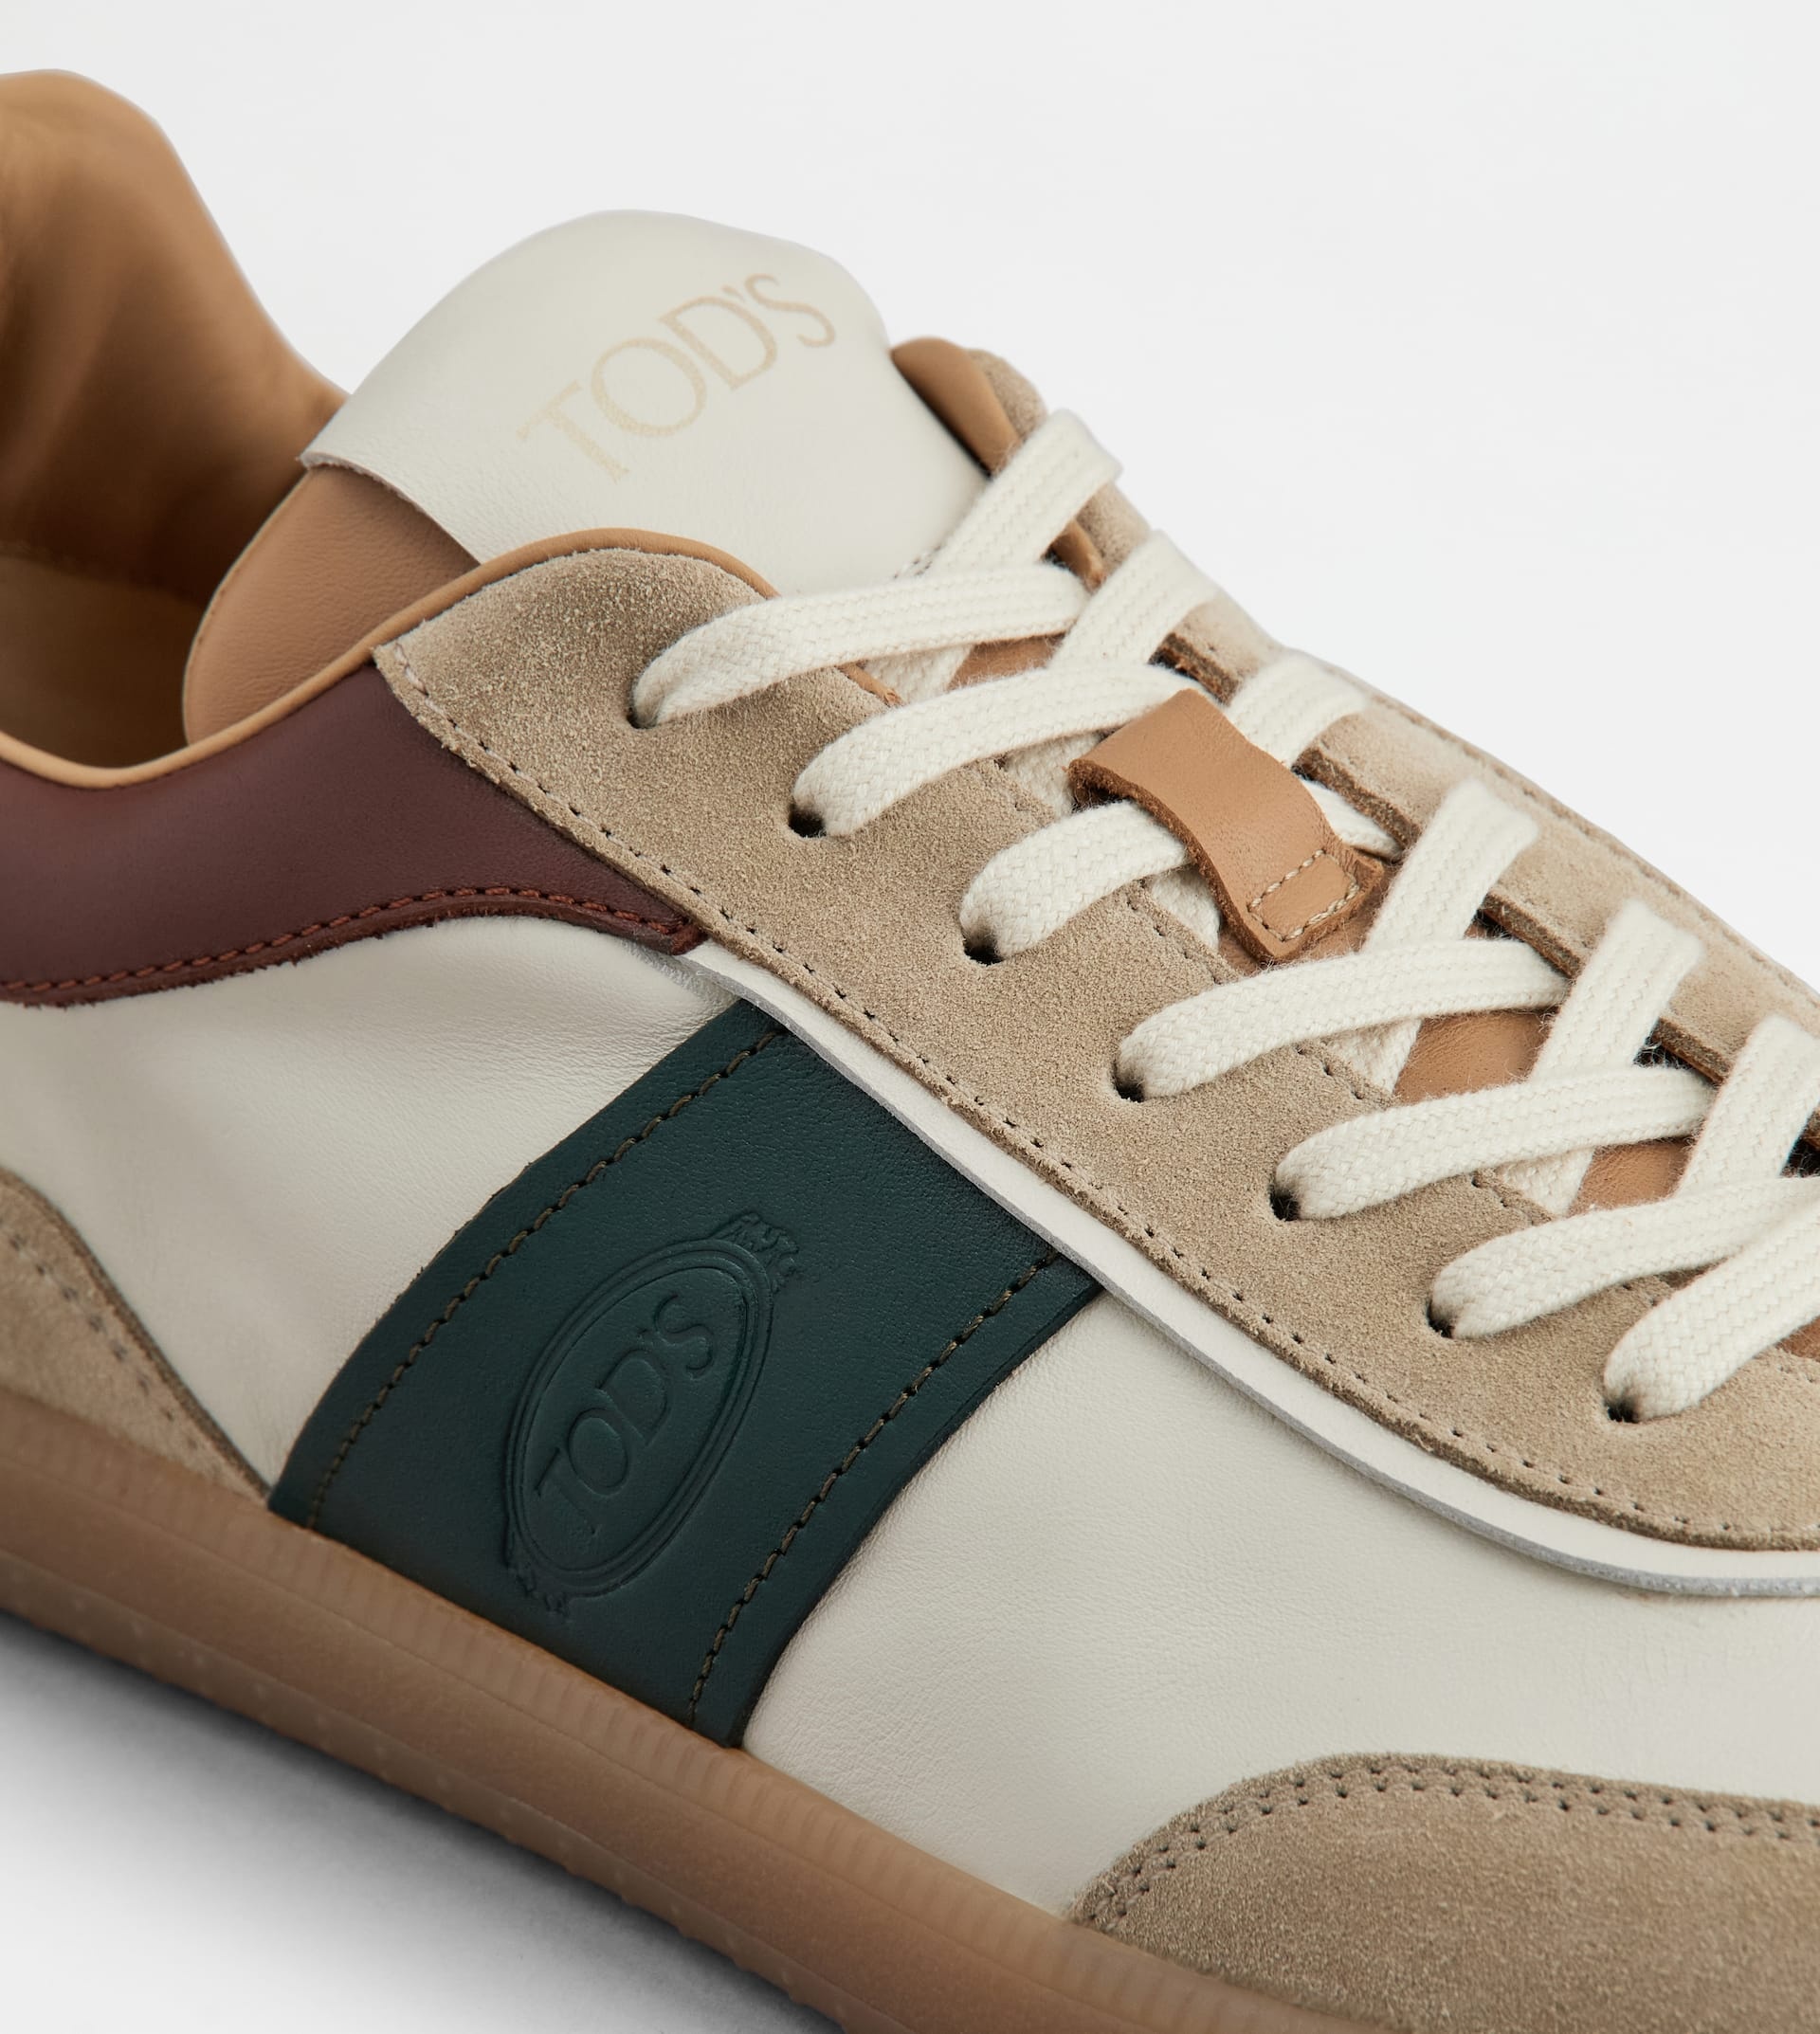 TOD'S TABS SNEAKERS IN SUEDE - OFF WHITE, BROWN, GREEN - 6